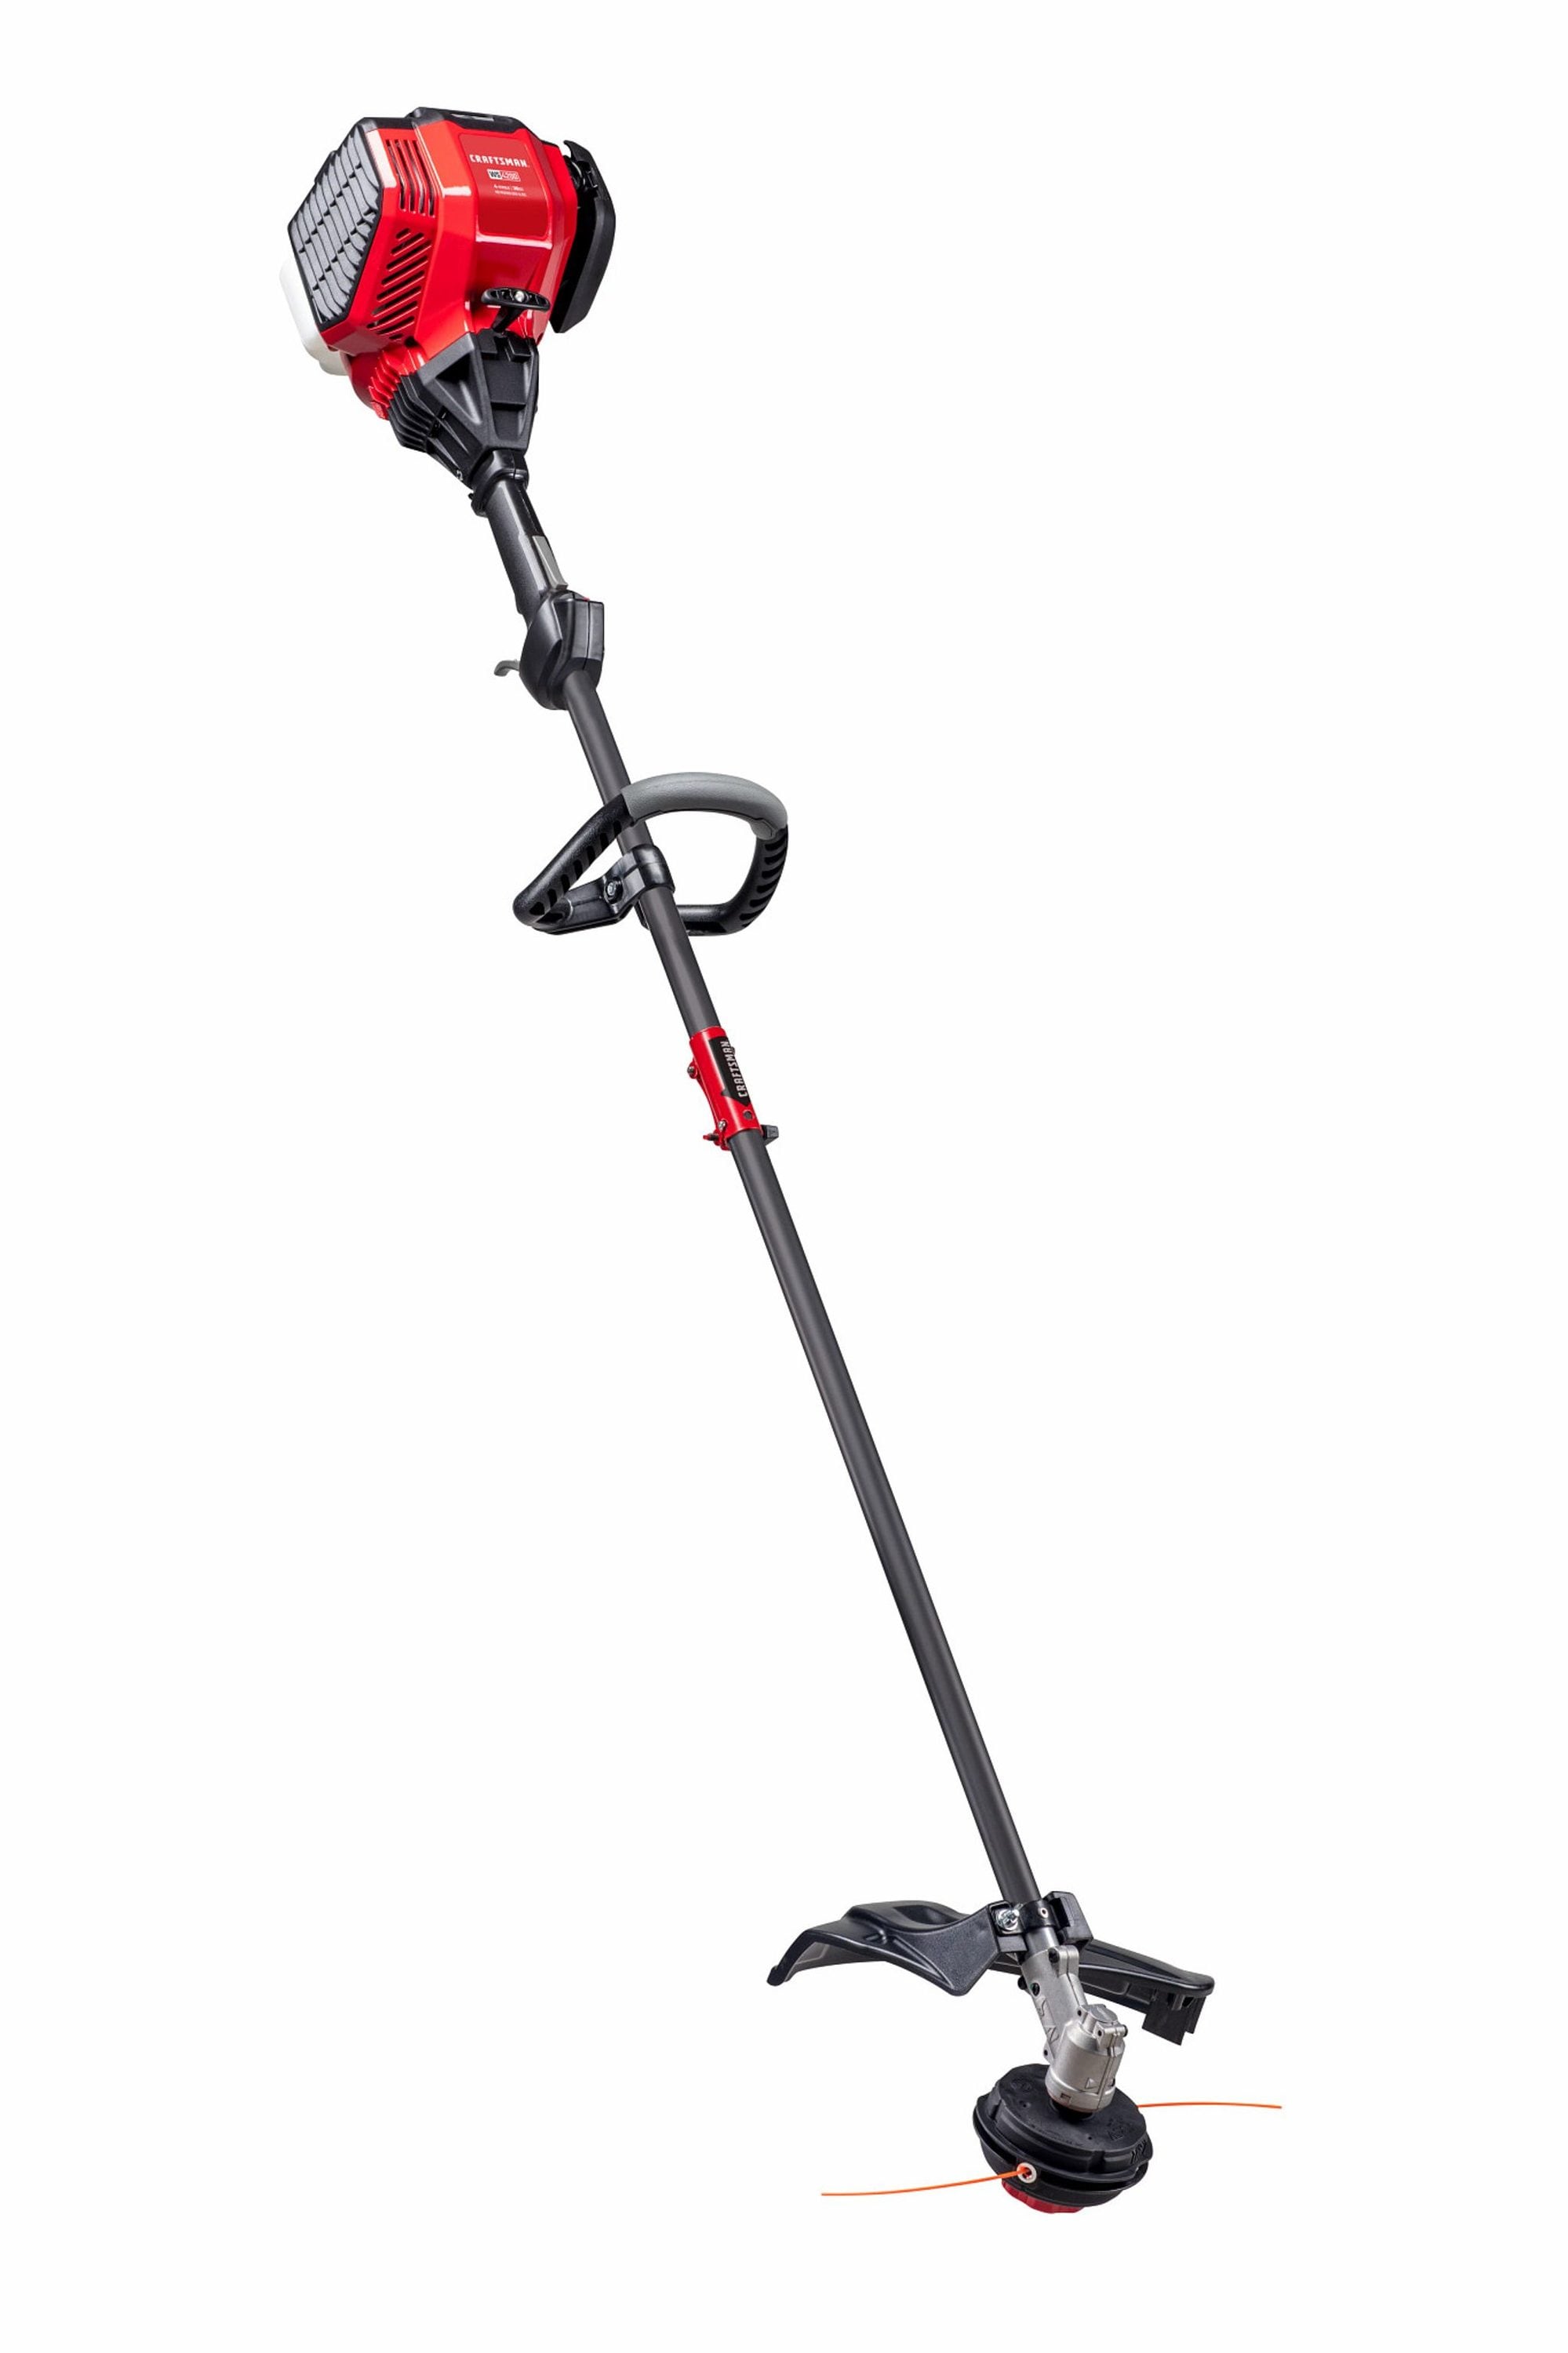 CRAFTSMAN WS4200 30-cc 4-Cycle 17-in Straight Shaft Gas String Trimmer with Attachment Capable and Edger Capable the Gas String Trimmers department at Lowes.com